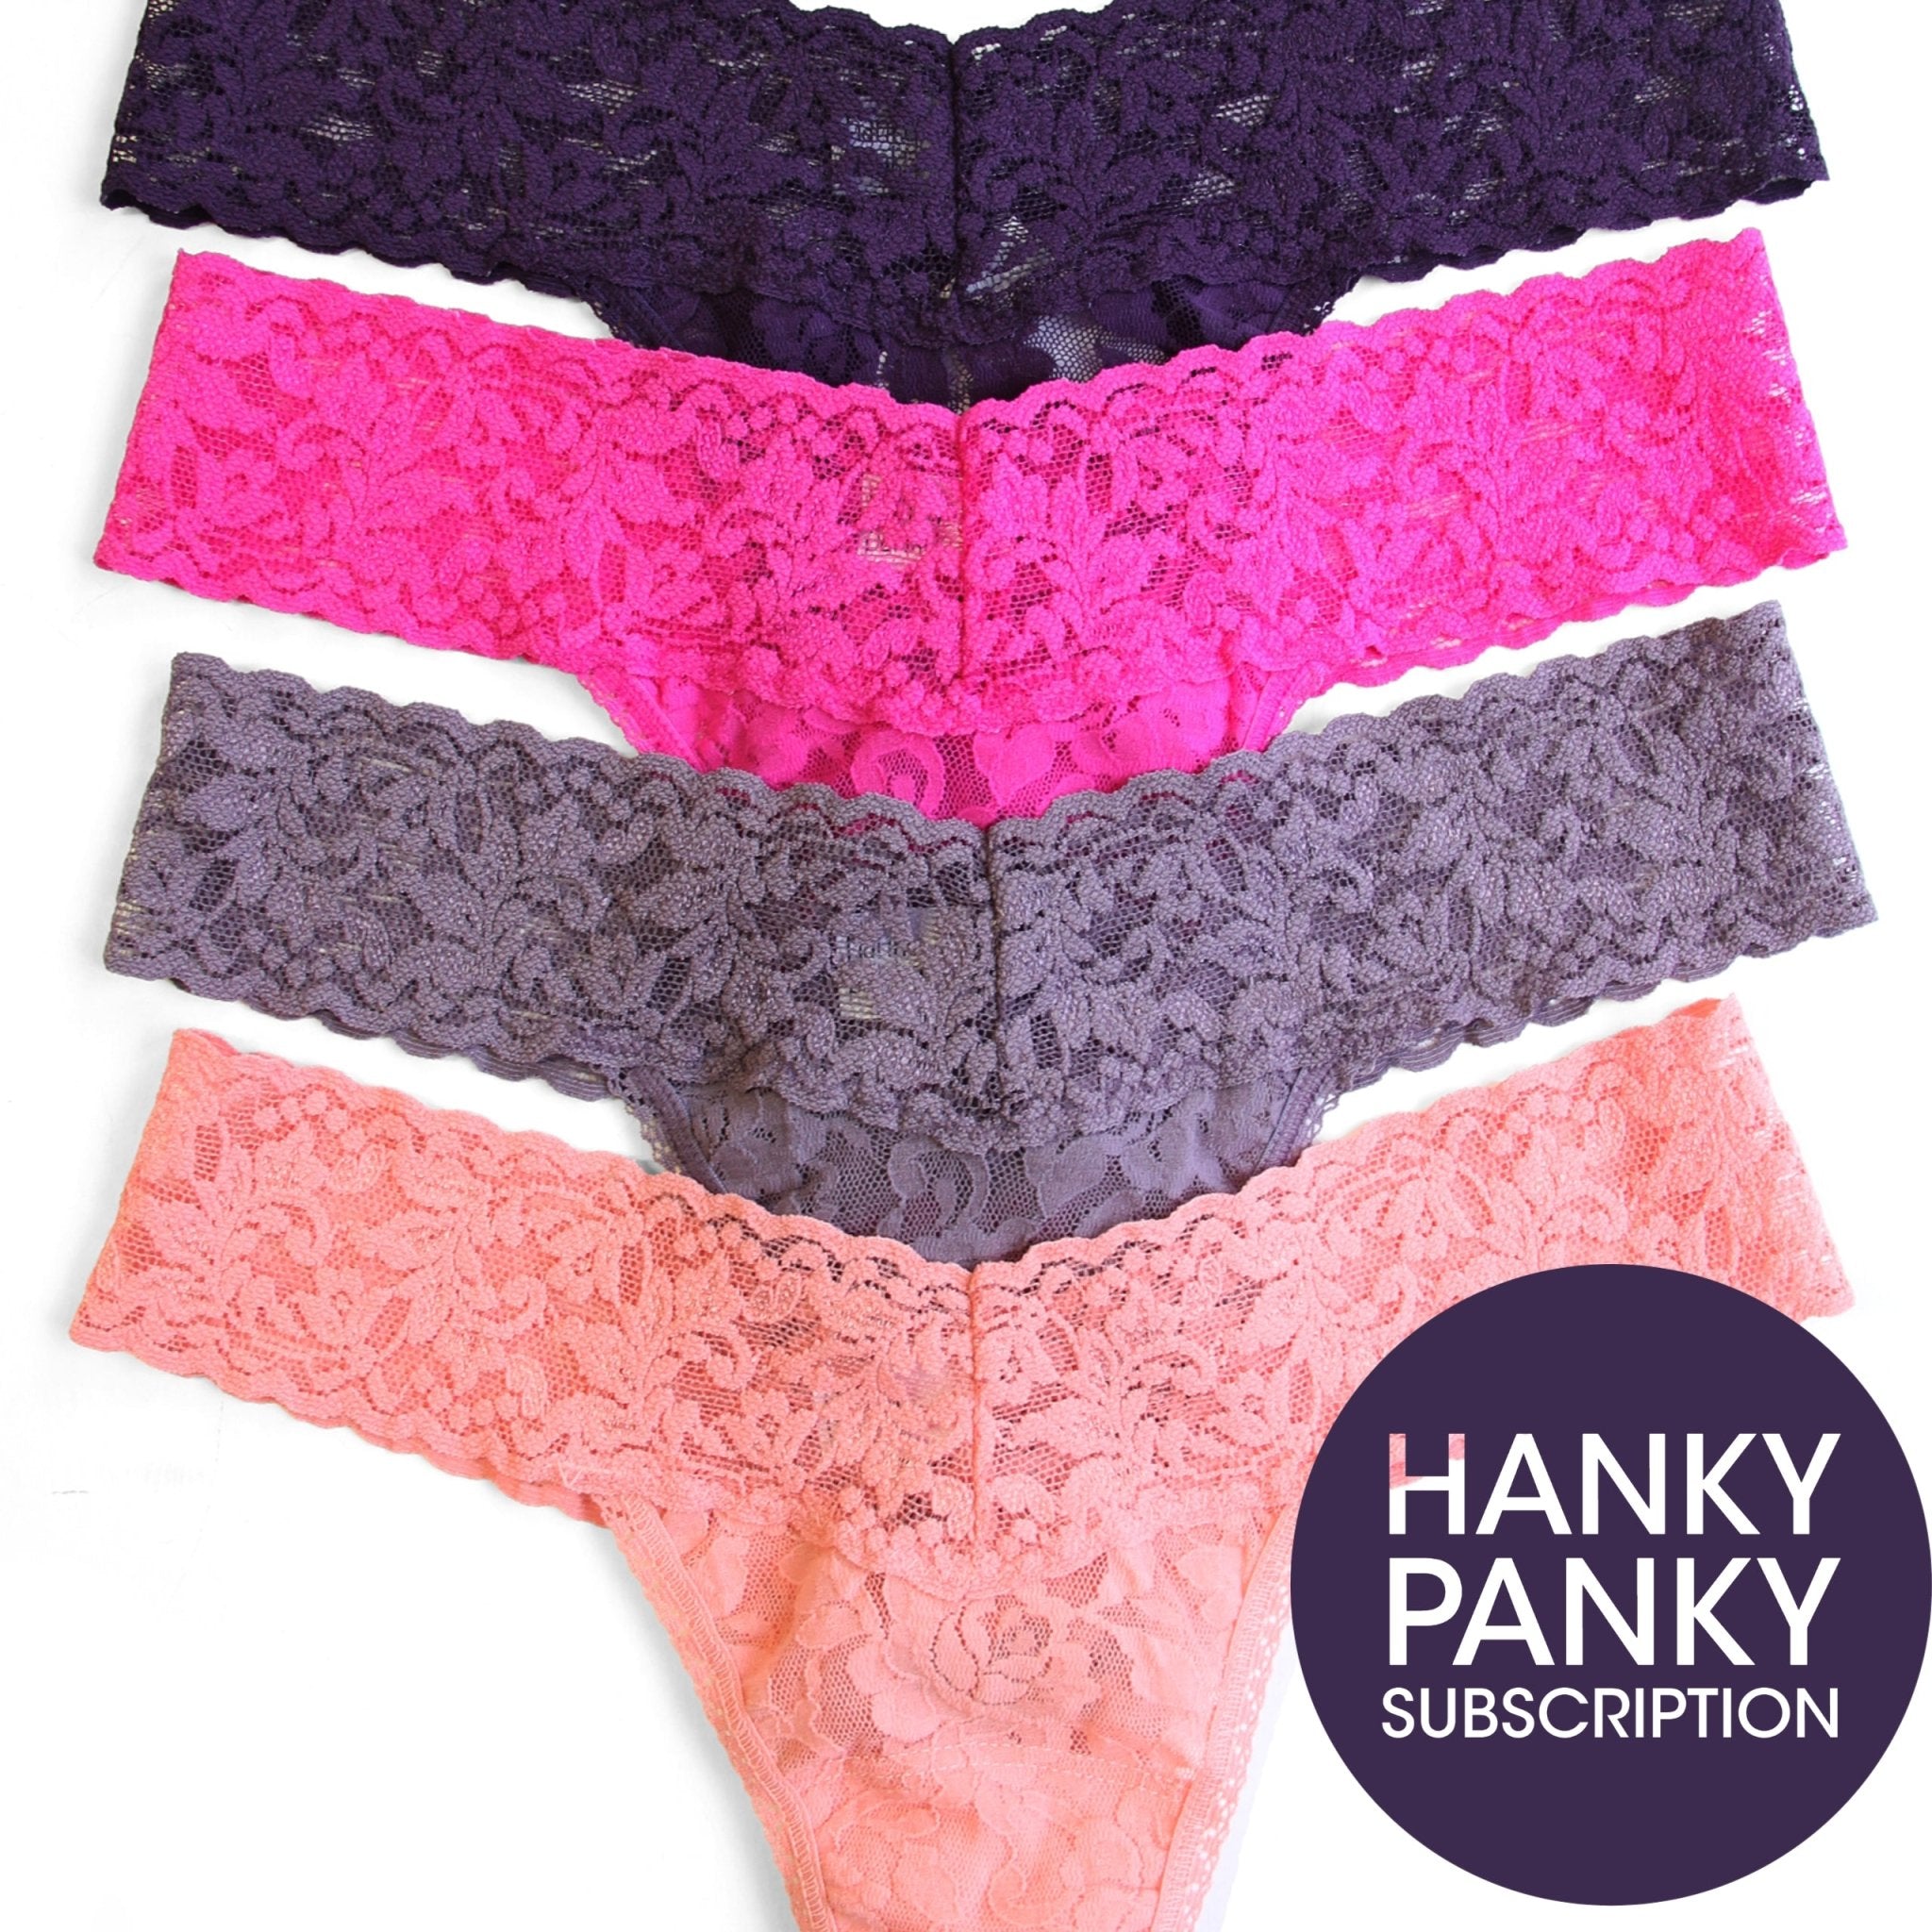 Hanky Panky for a Year: Thong Subscription Service - My Filosophy